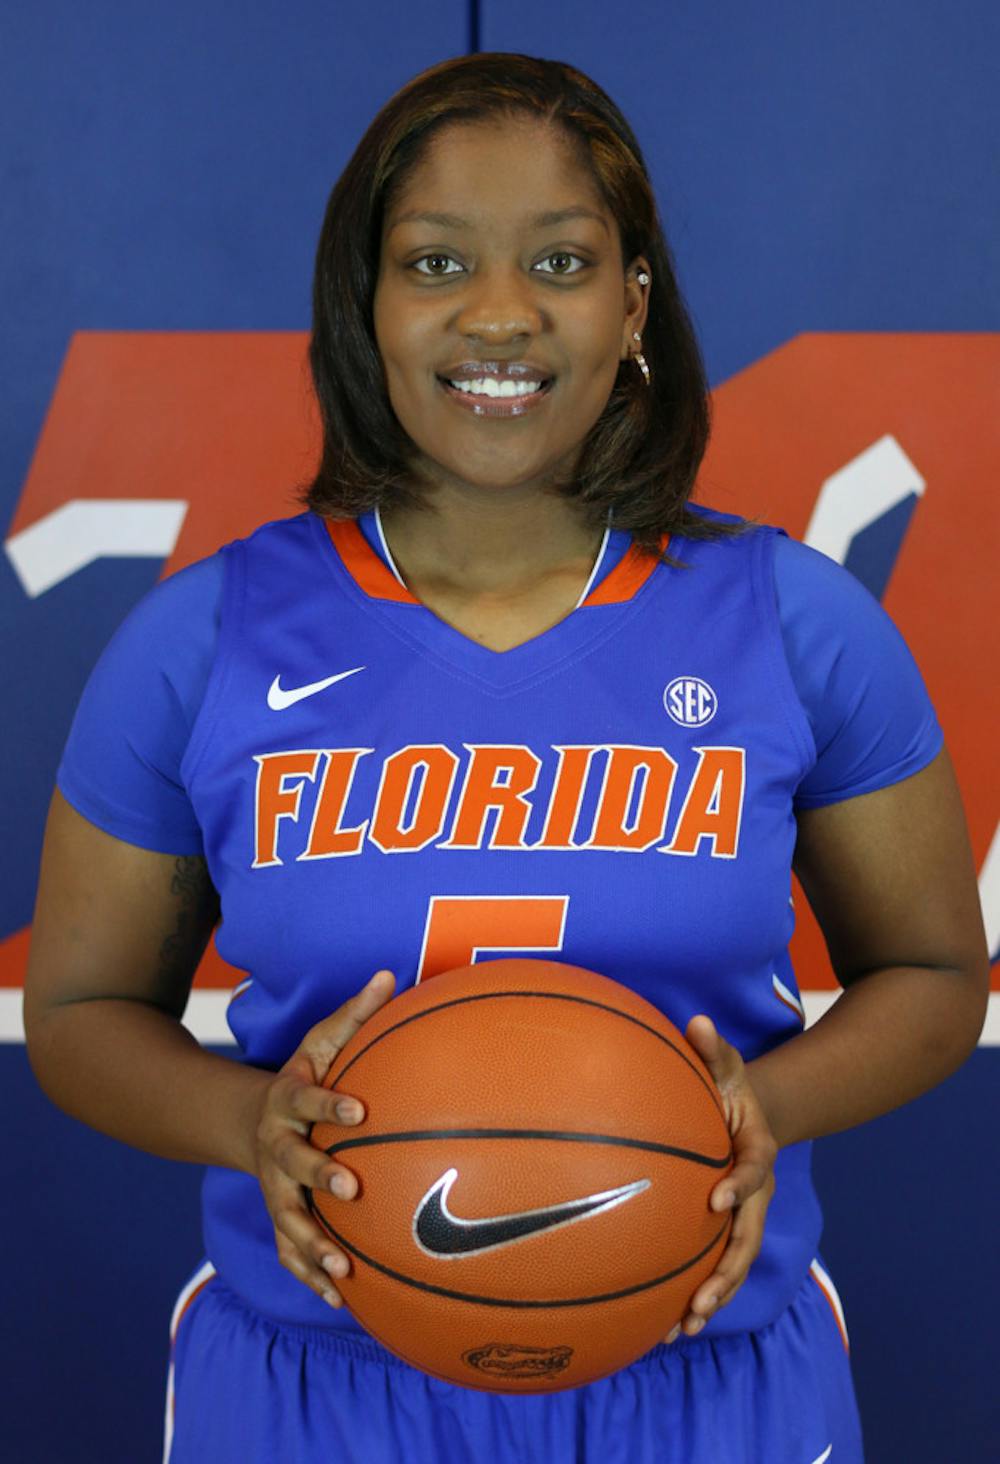 <p>Sophomore Antoinette Bannister poses for a photo during Florida’s basketball media day.</p>